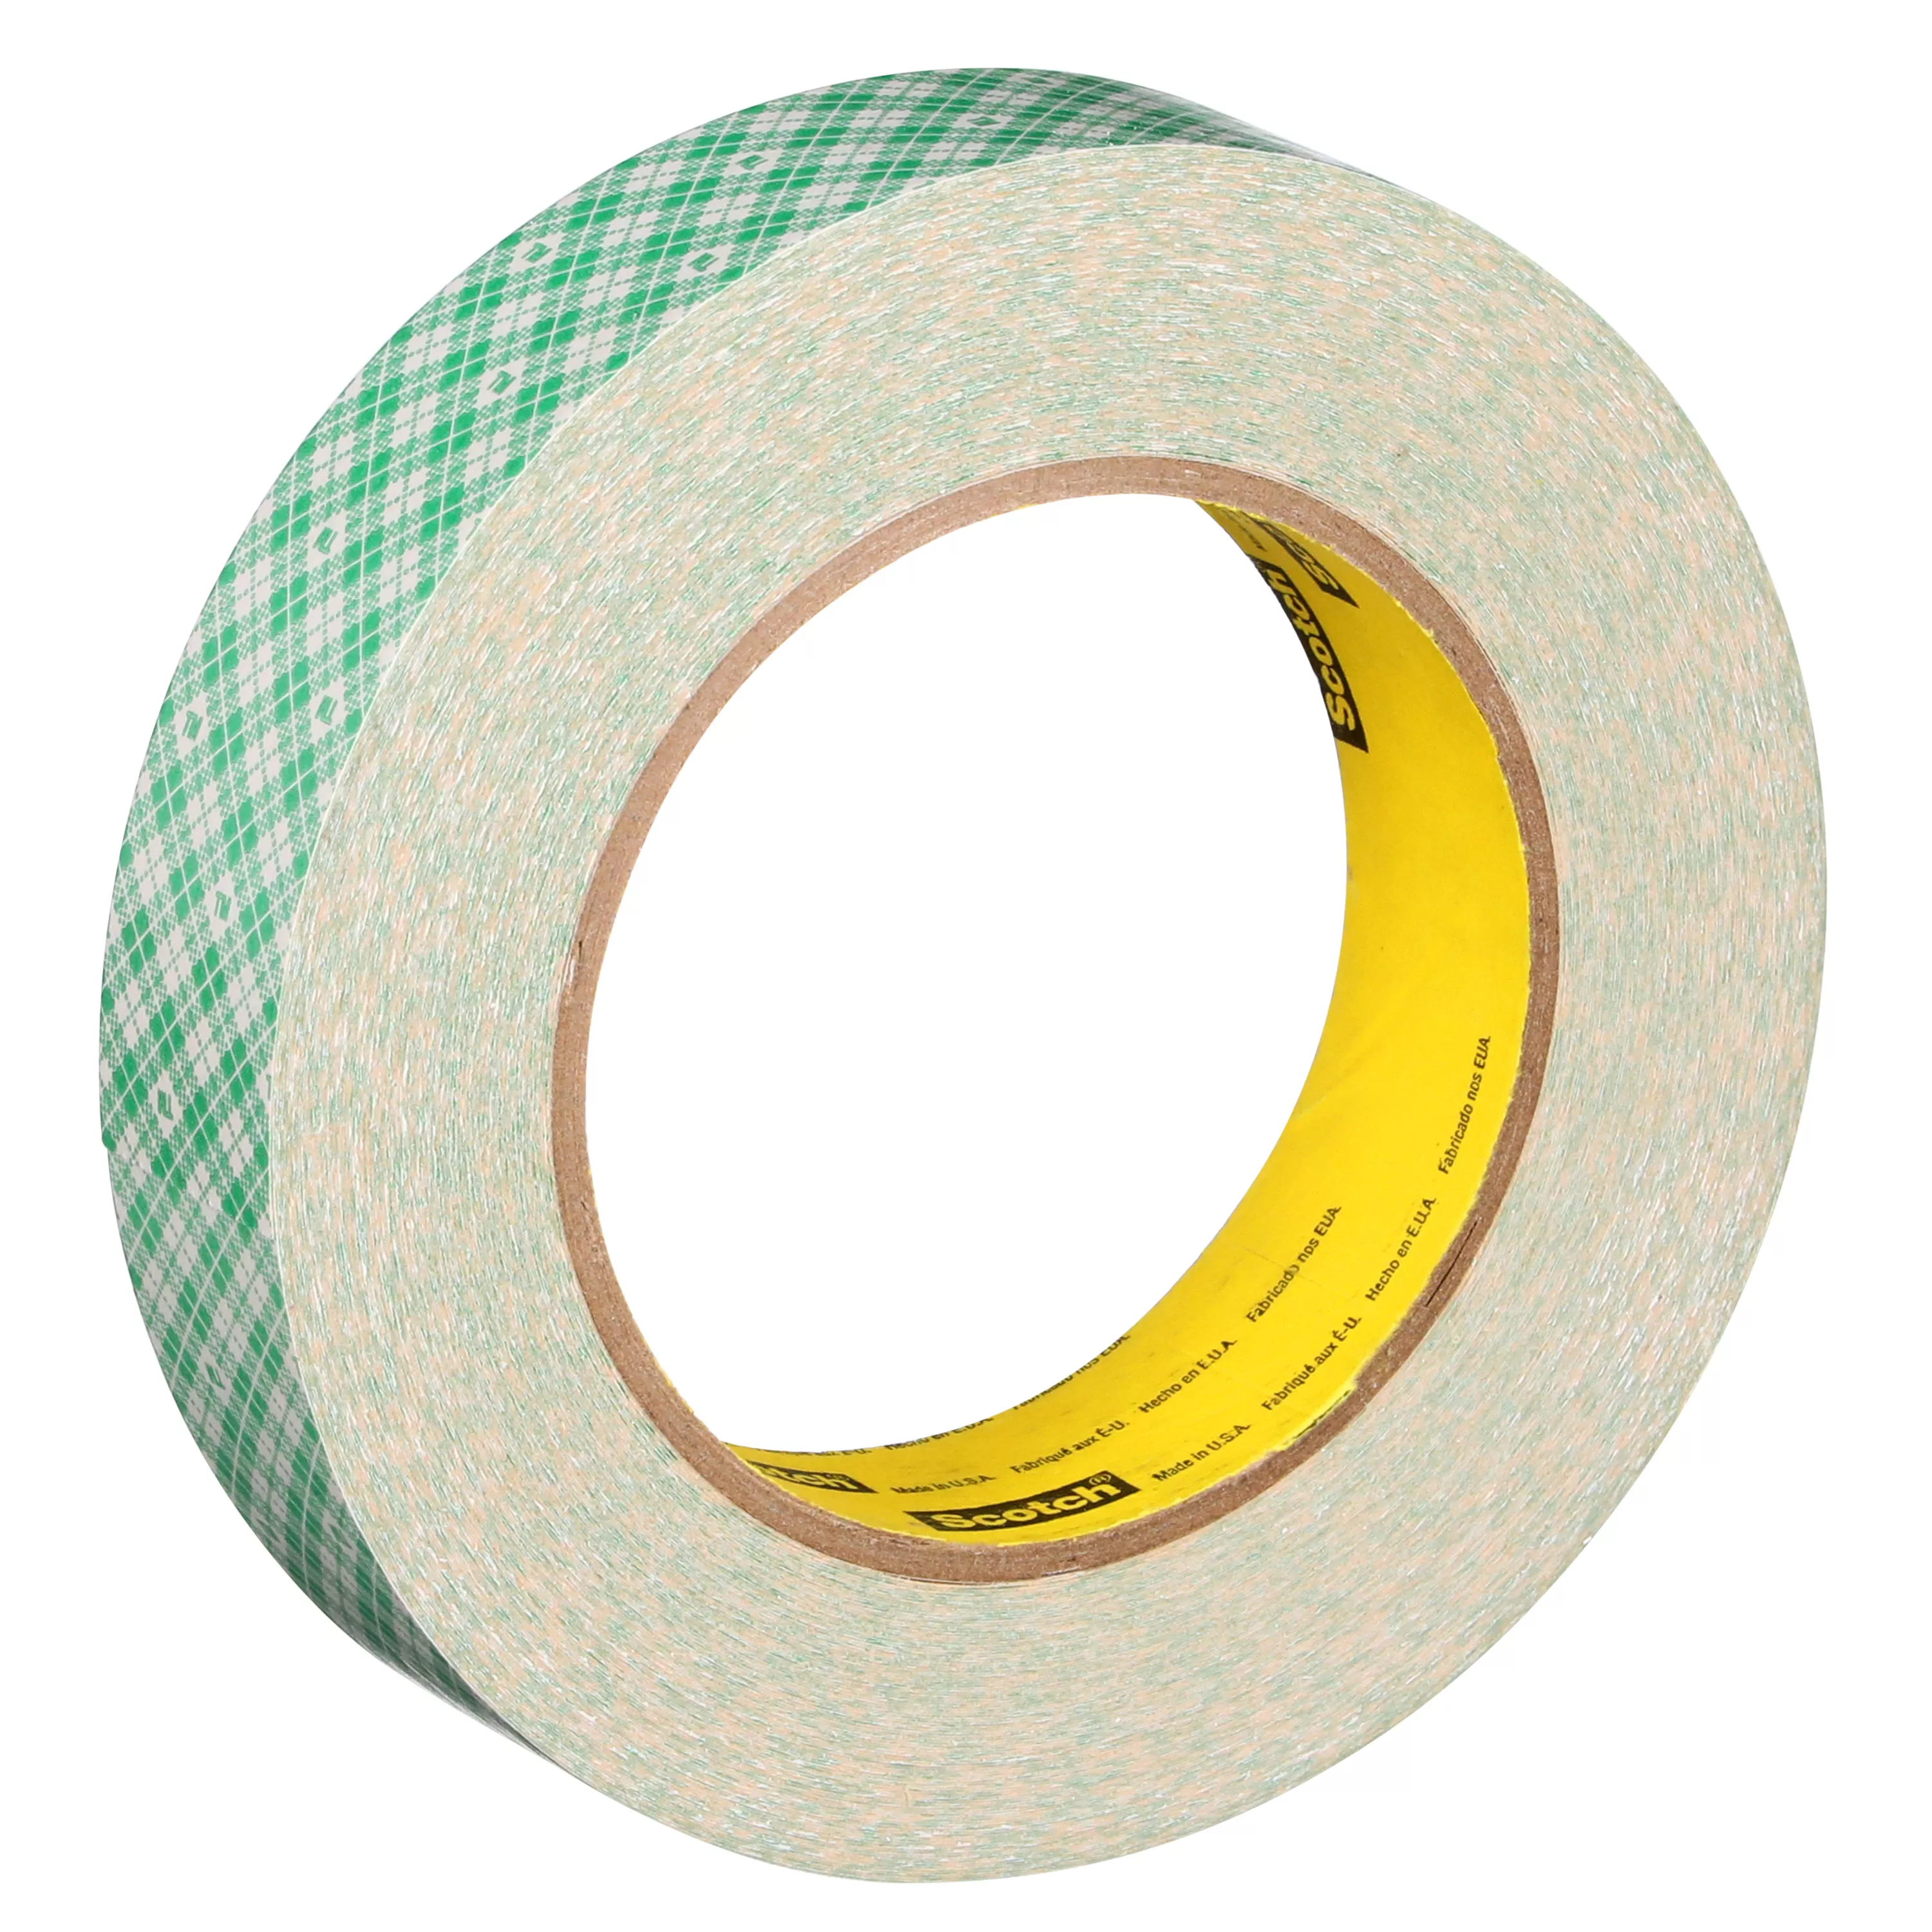 3M™ Double Coated Paper Tape 410M, Natural, 1 in x 36 yd, 5 mil, 36
rolls per case